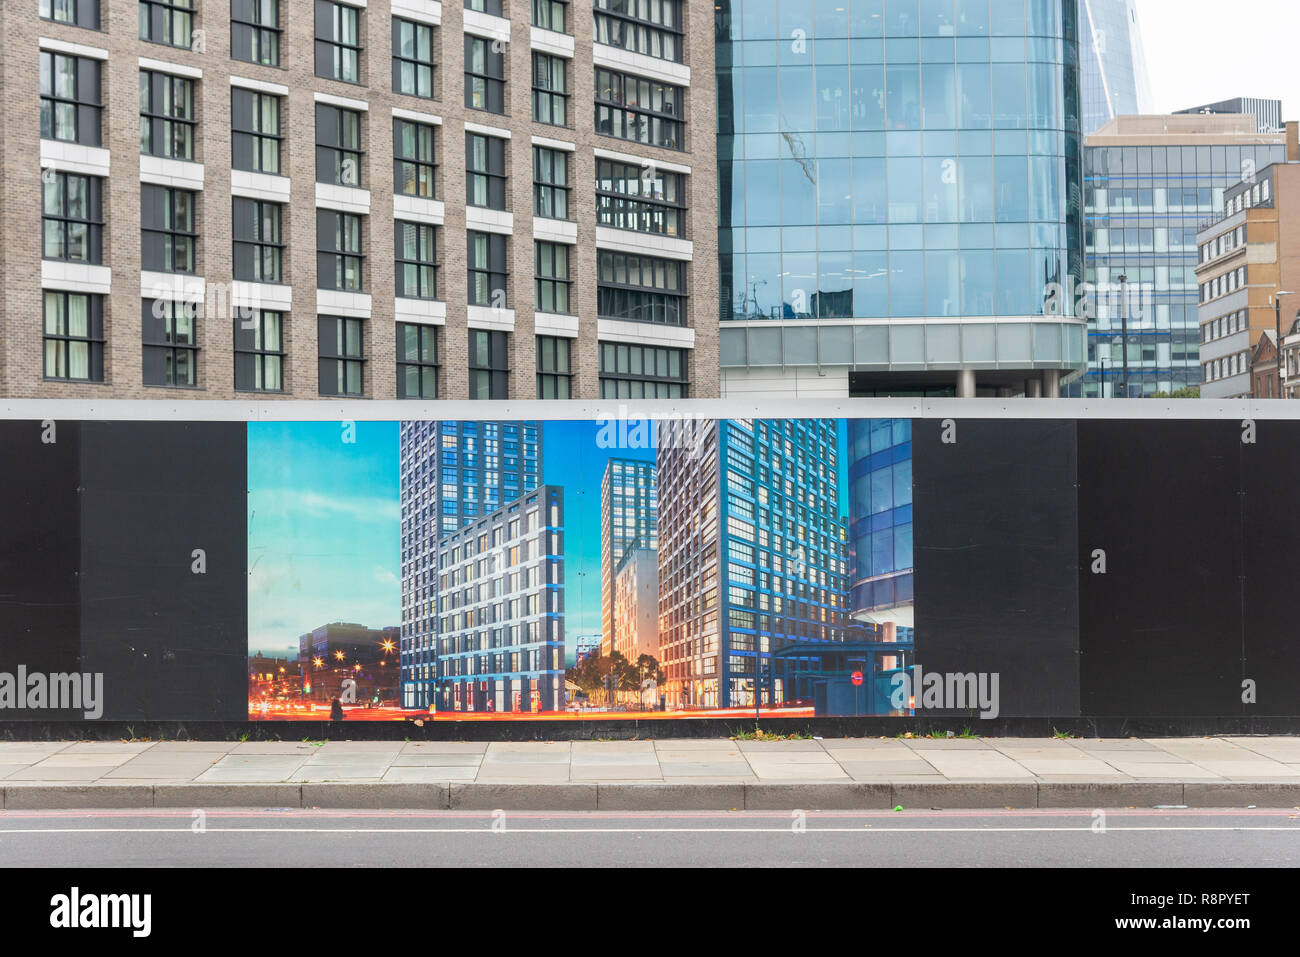 Hoarding showing how new office development will look when completed, Aldgate, City of London, UK Stock Photo